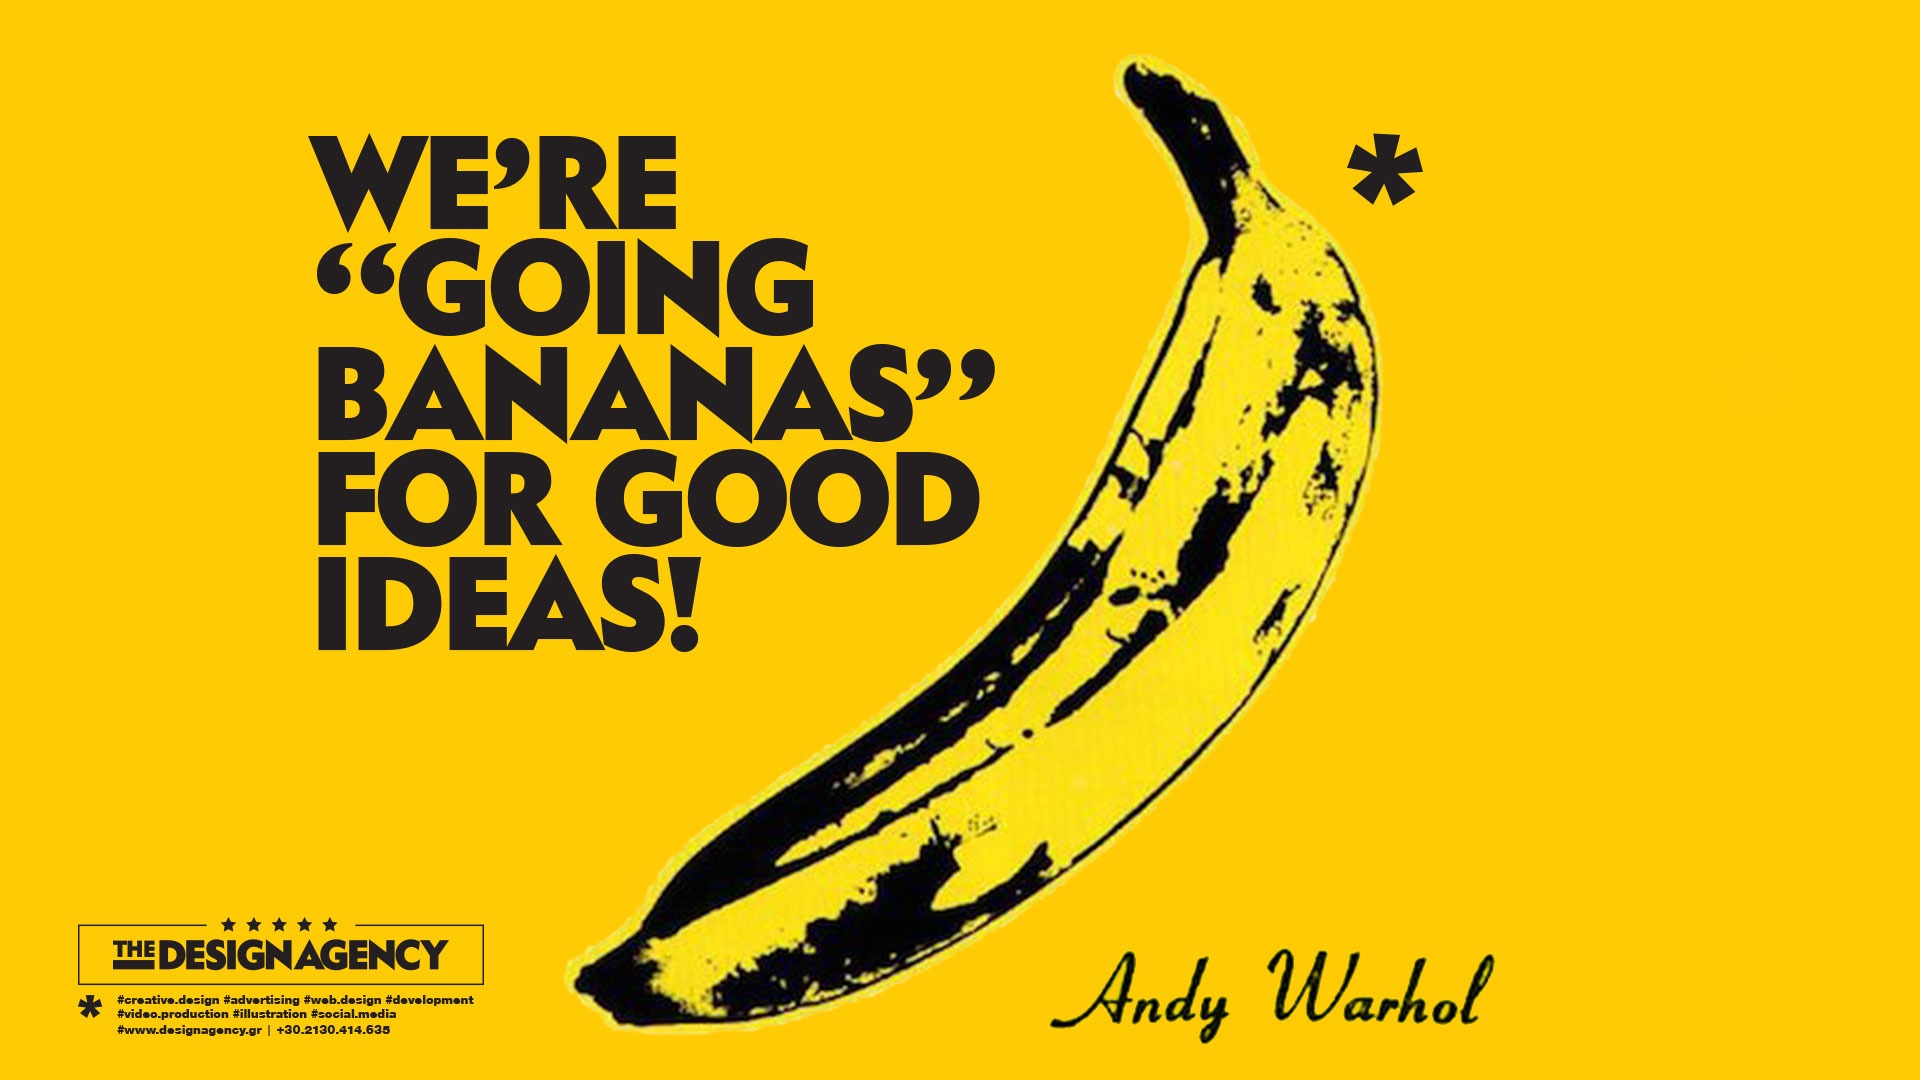 We’re  “going bananas” for good ideas!